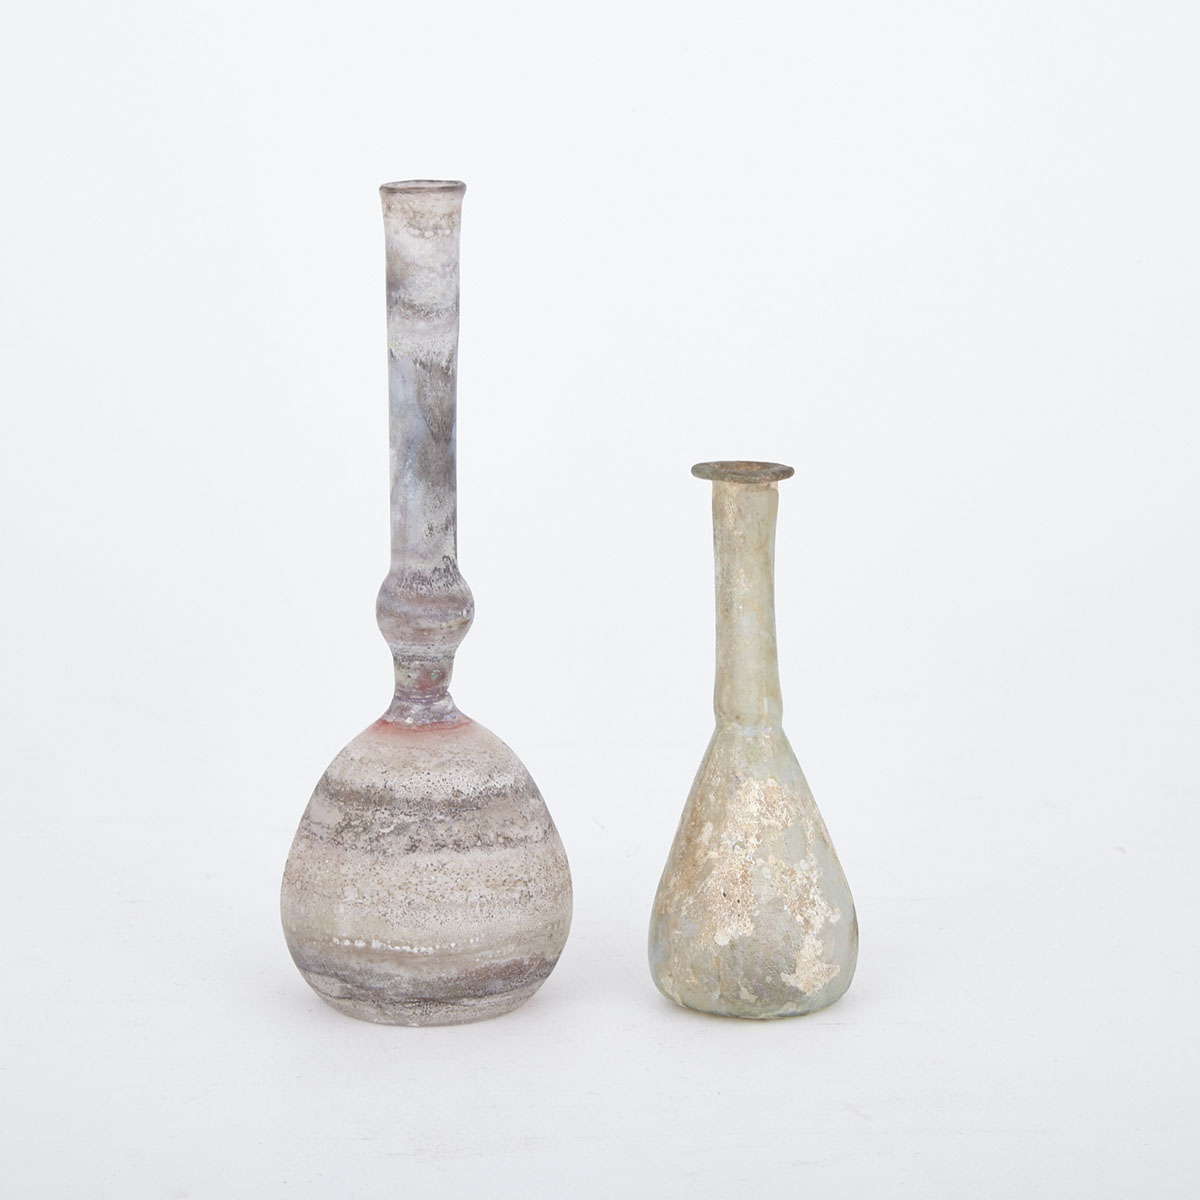 Two Small Eastern Mediterranean (Roman) Glass Bottles, 1st-2nd century AD